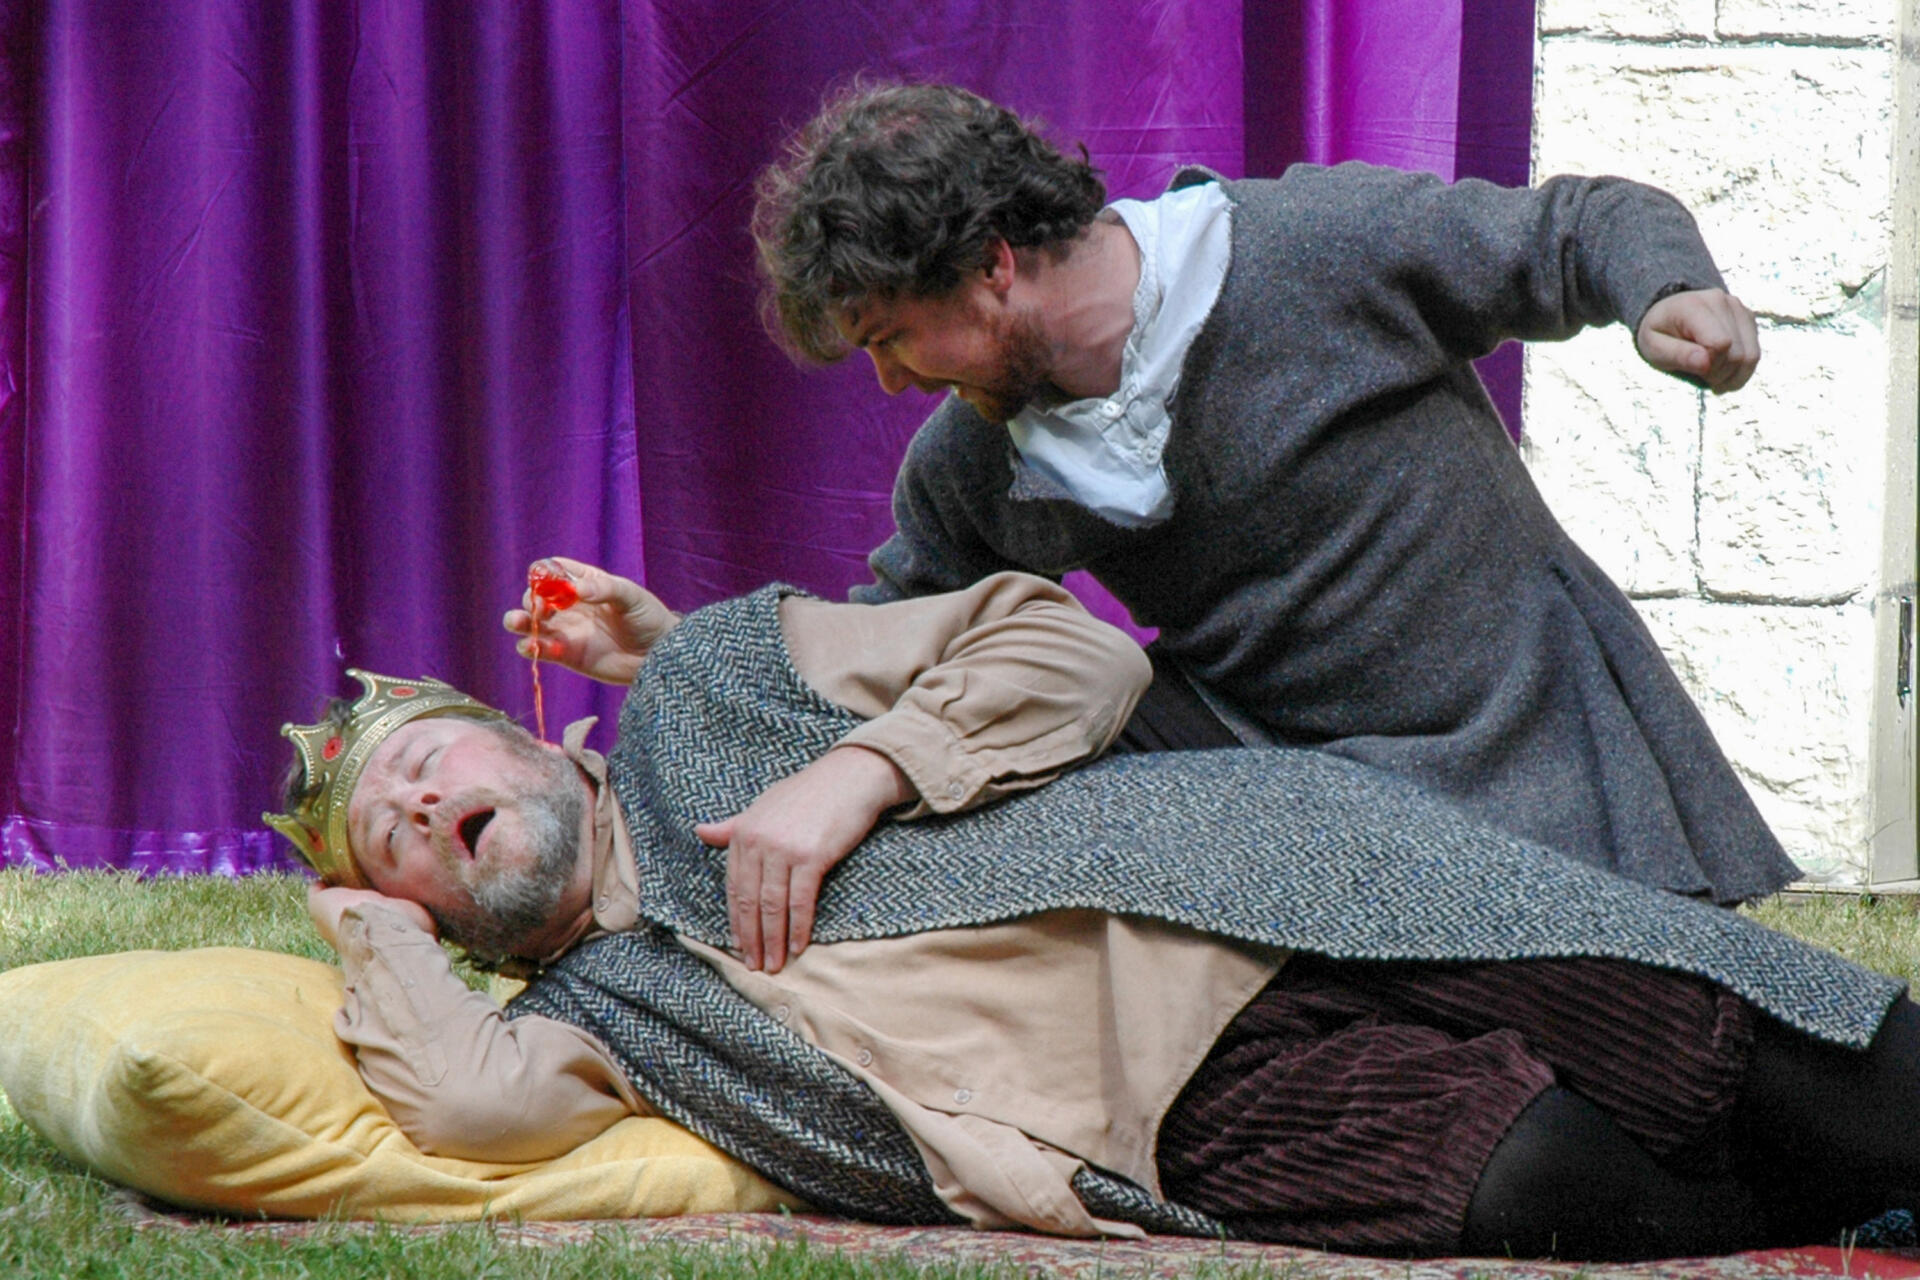 Stephen Grenley and Nick Edwards in Hamlet - 2008